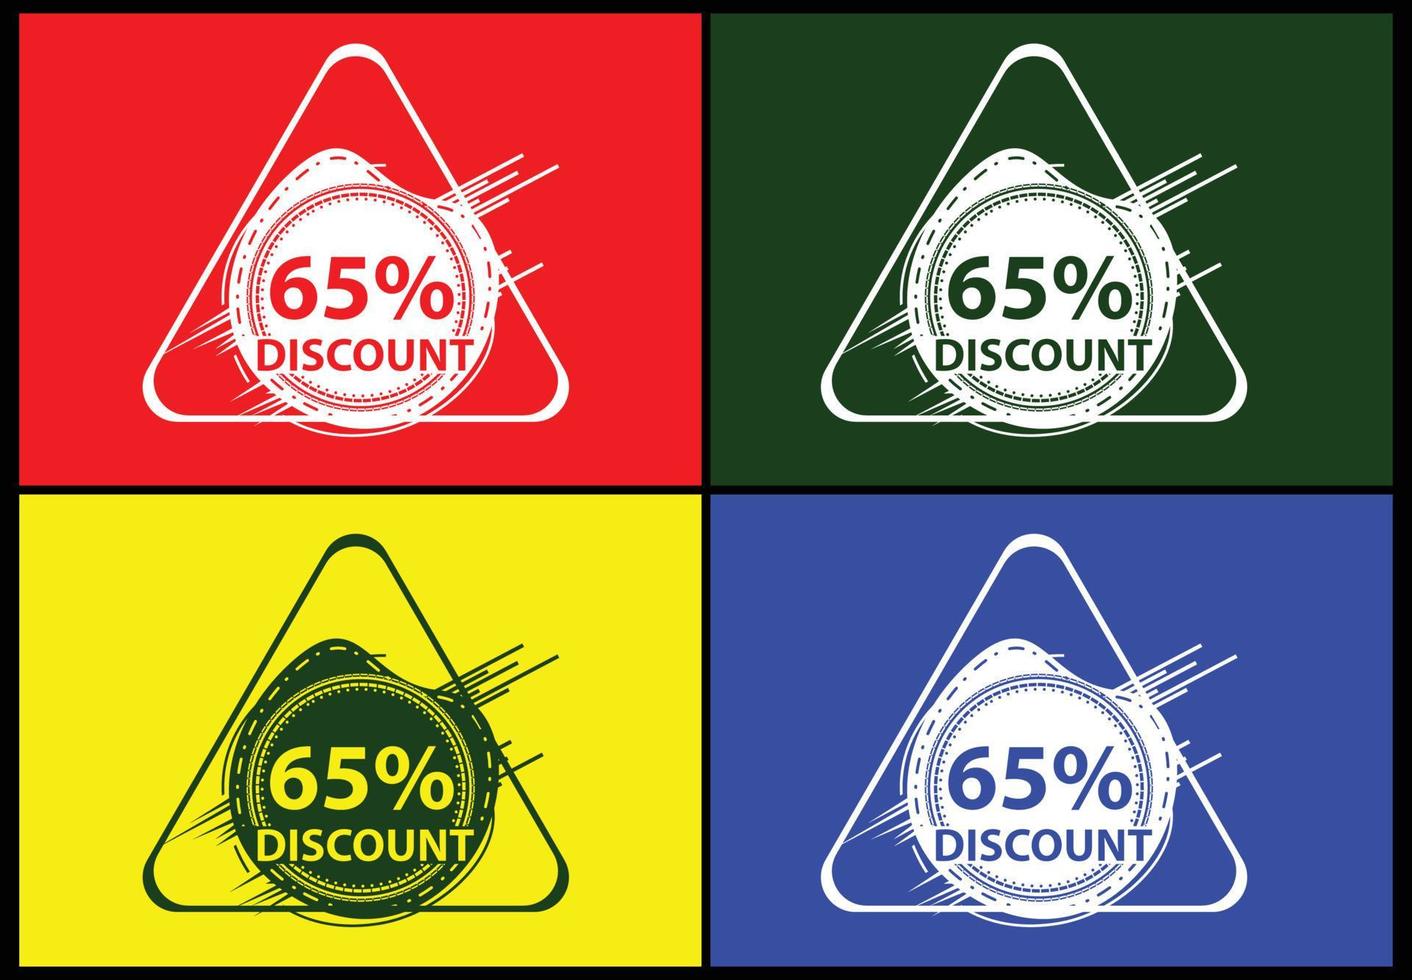 65 percent discount new offer logo and icon design template vector